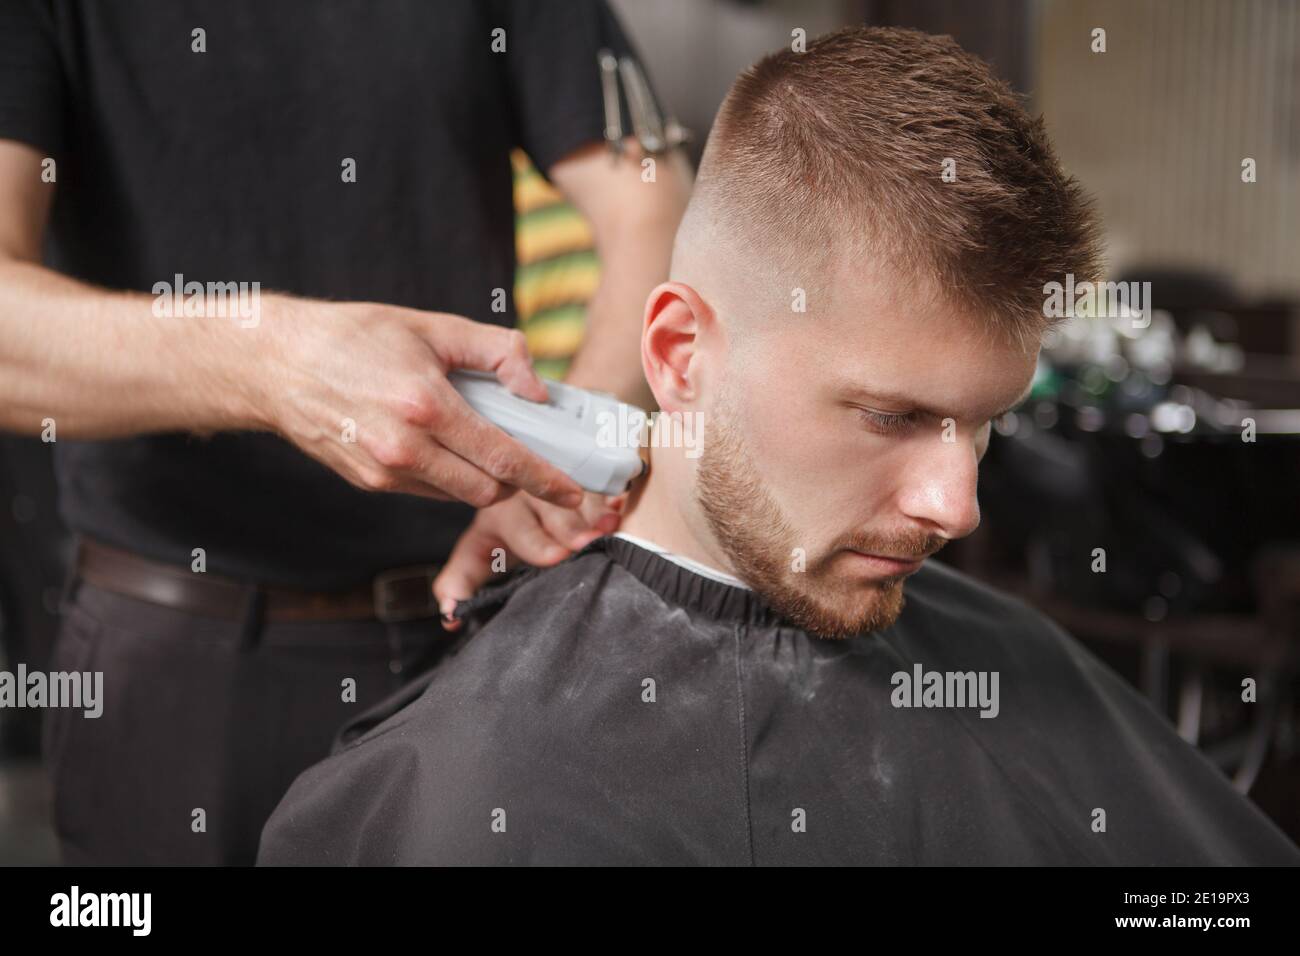 Male client getting new haircut at the barbershop Stock Photo